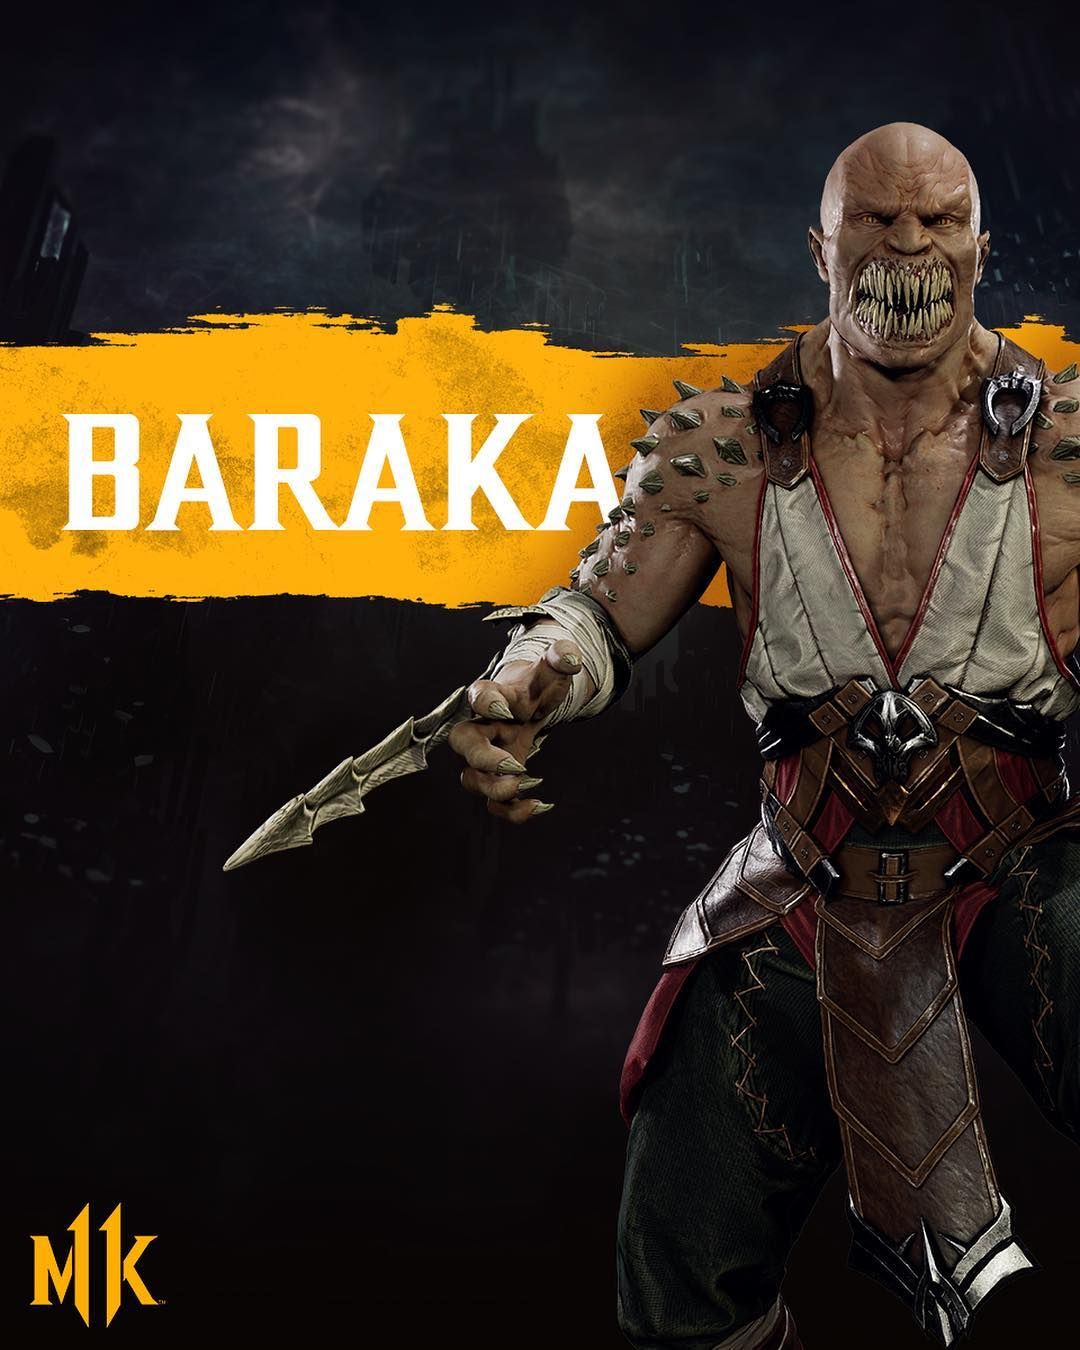 Mortal Kombat 11 on Instagram: “The War Chief of the nomadic